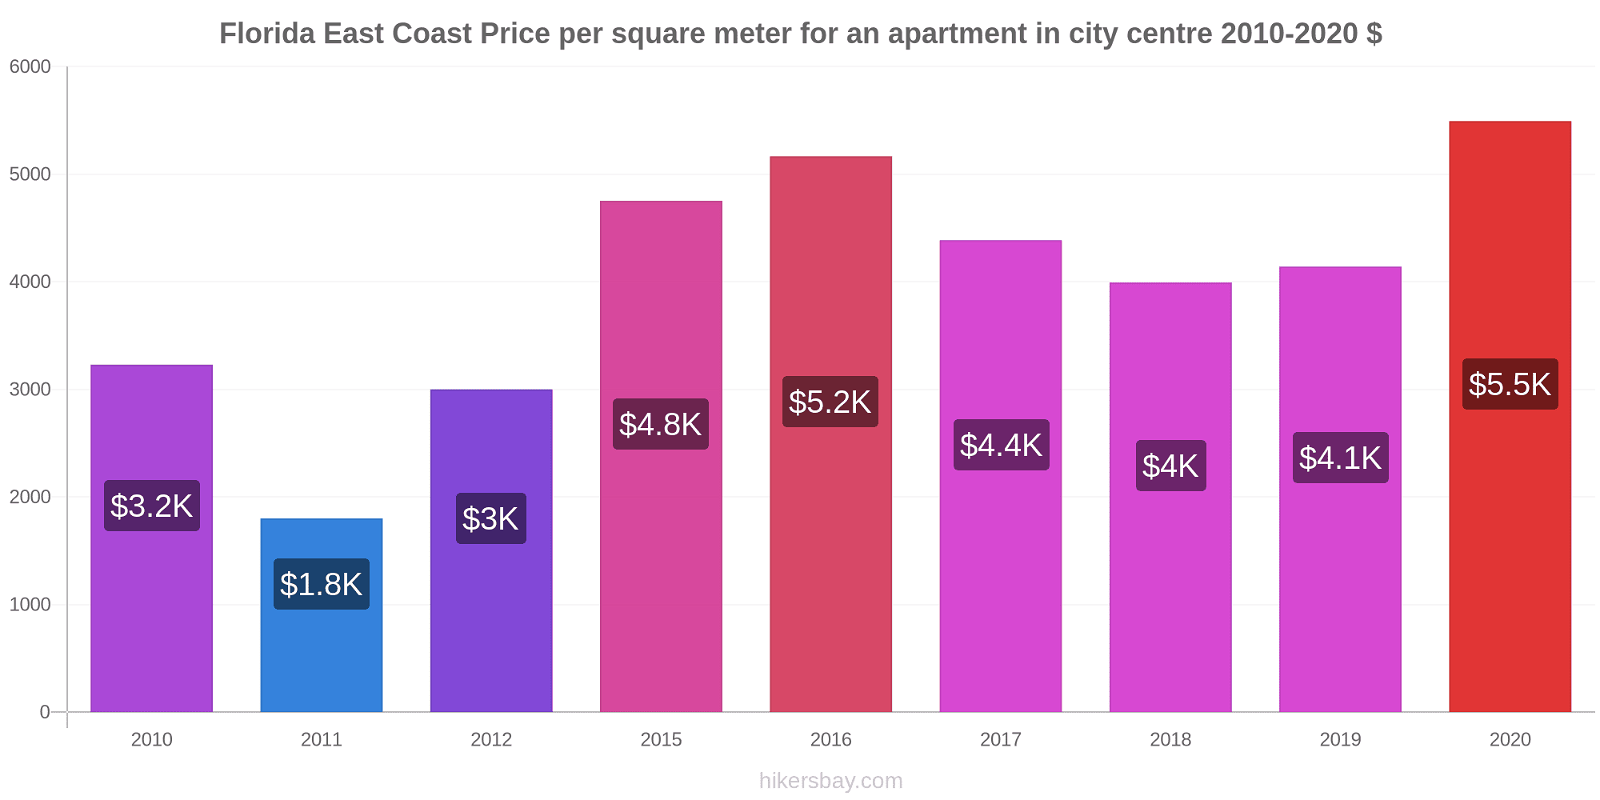 Florida East Coast price changes Price per square meter for an apartment in city centre hikersbay.com